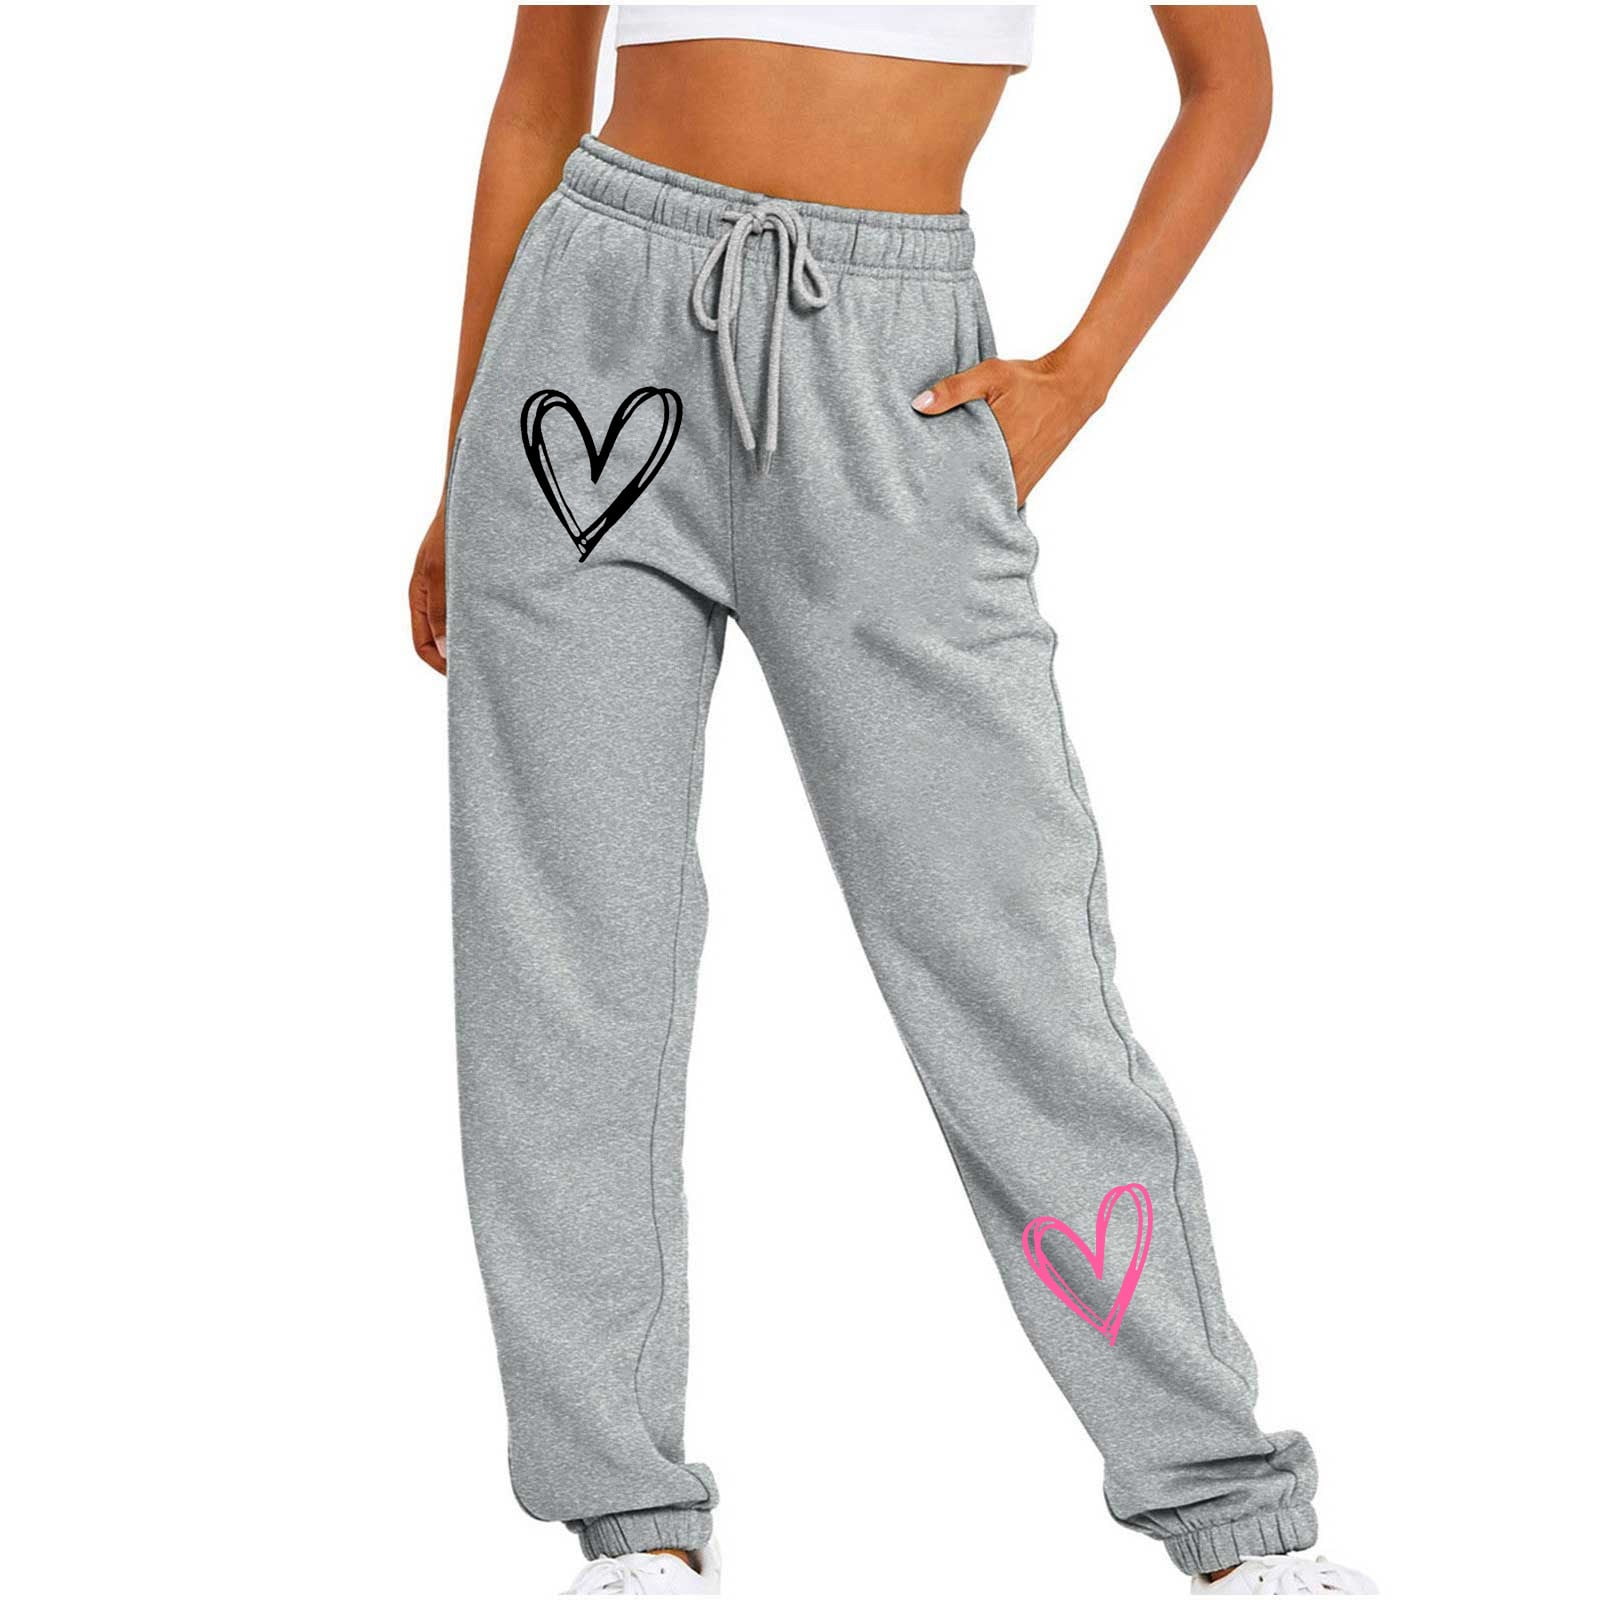 Buy JC Fleece Jogger Pants (7-16) Girls Bottoms from Juicy Couture. Find  Juicy Couture fashion & more at DrJays.com